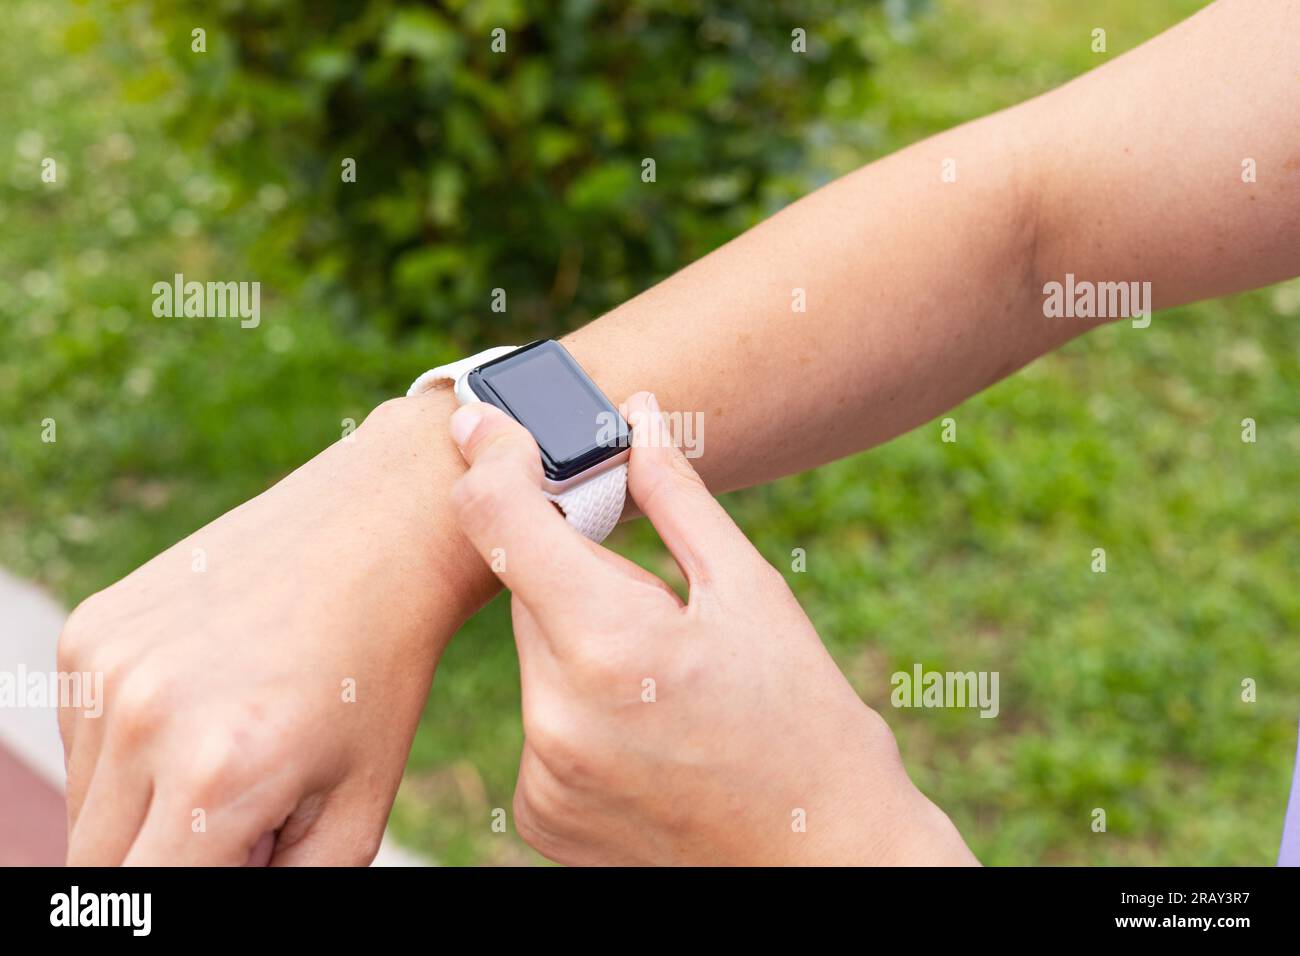 Young woman checking a sport smartwatch after running outdoors. Female with fitness tracker watch to monitor training in an urban park. Stock Photo